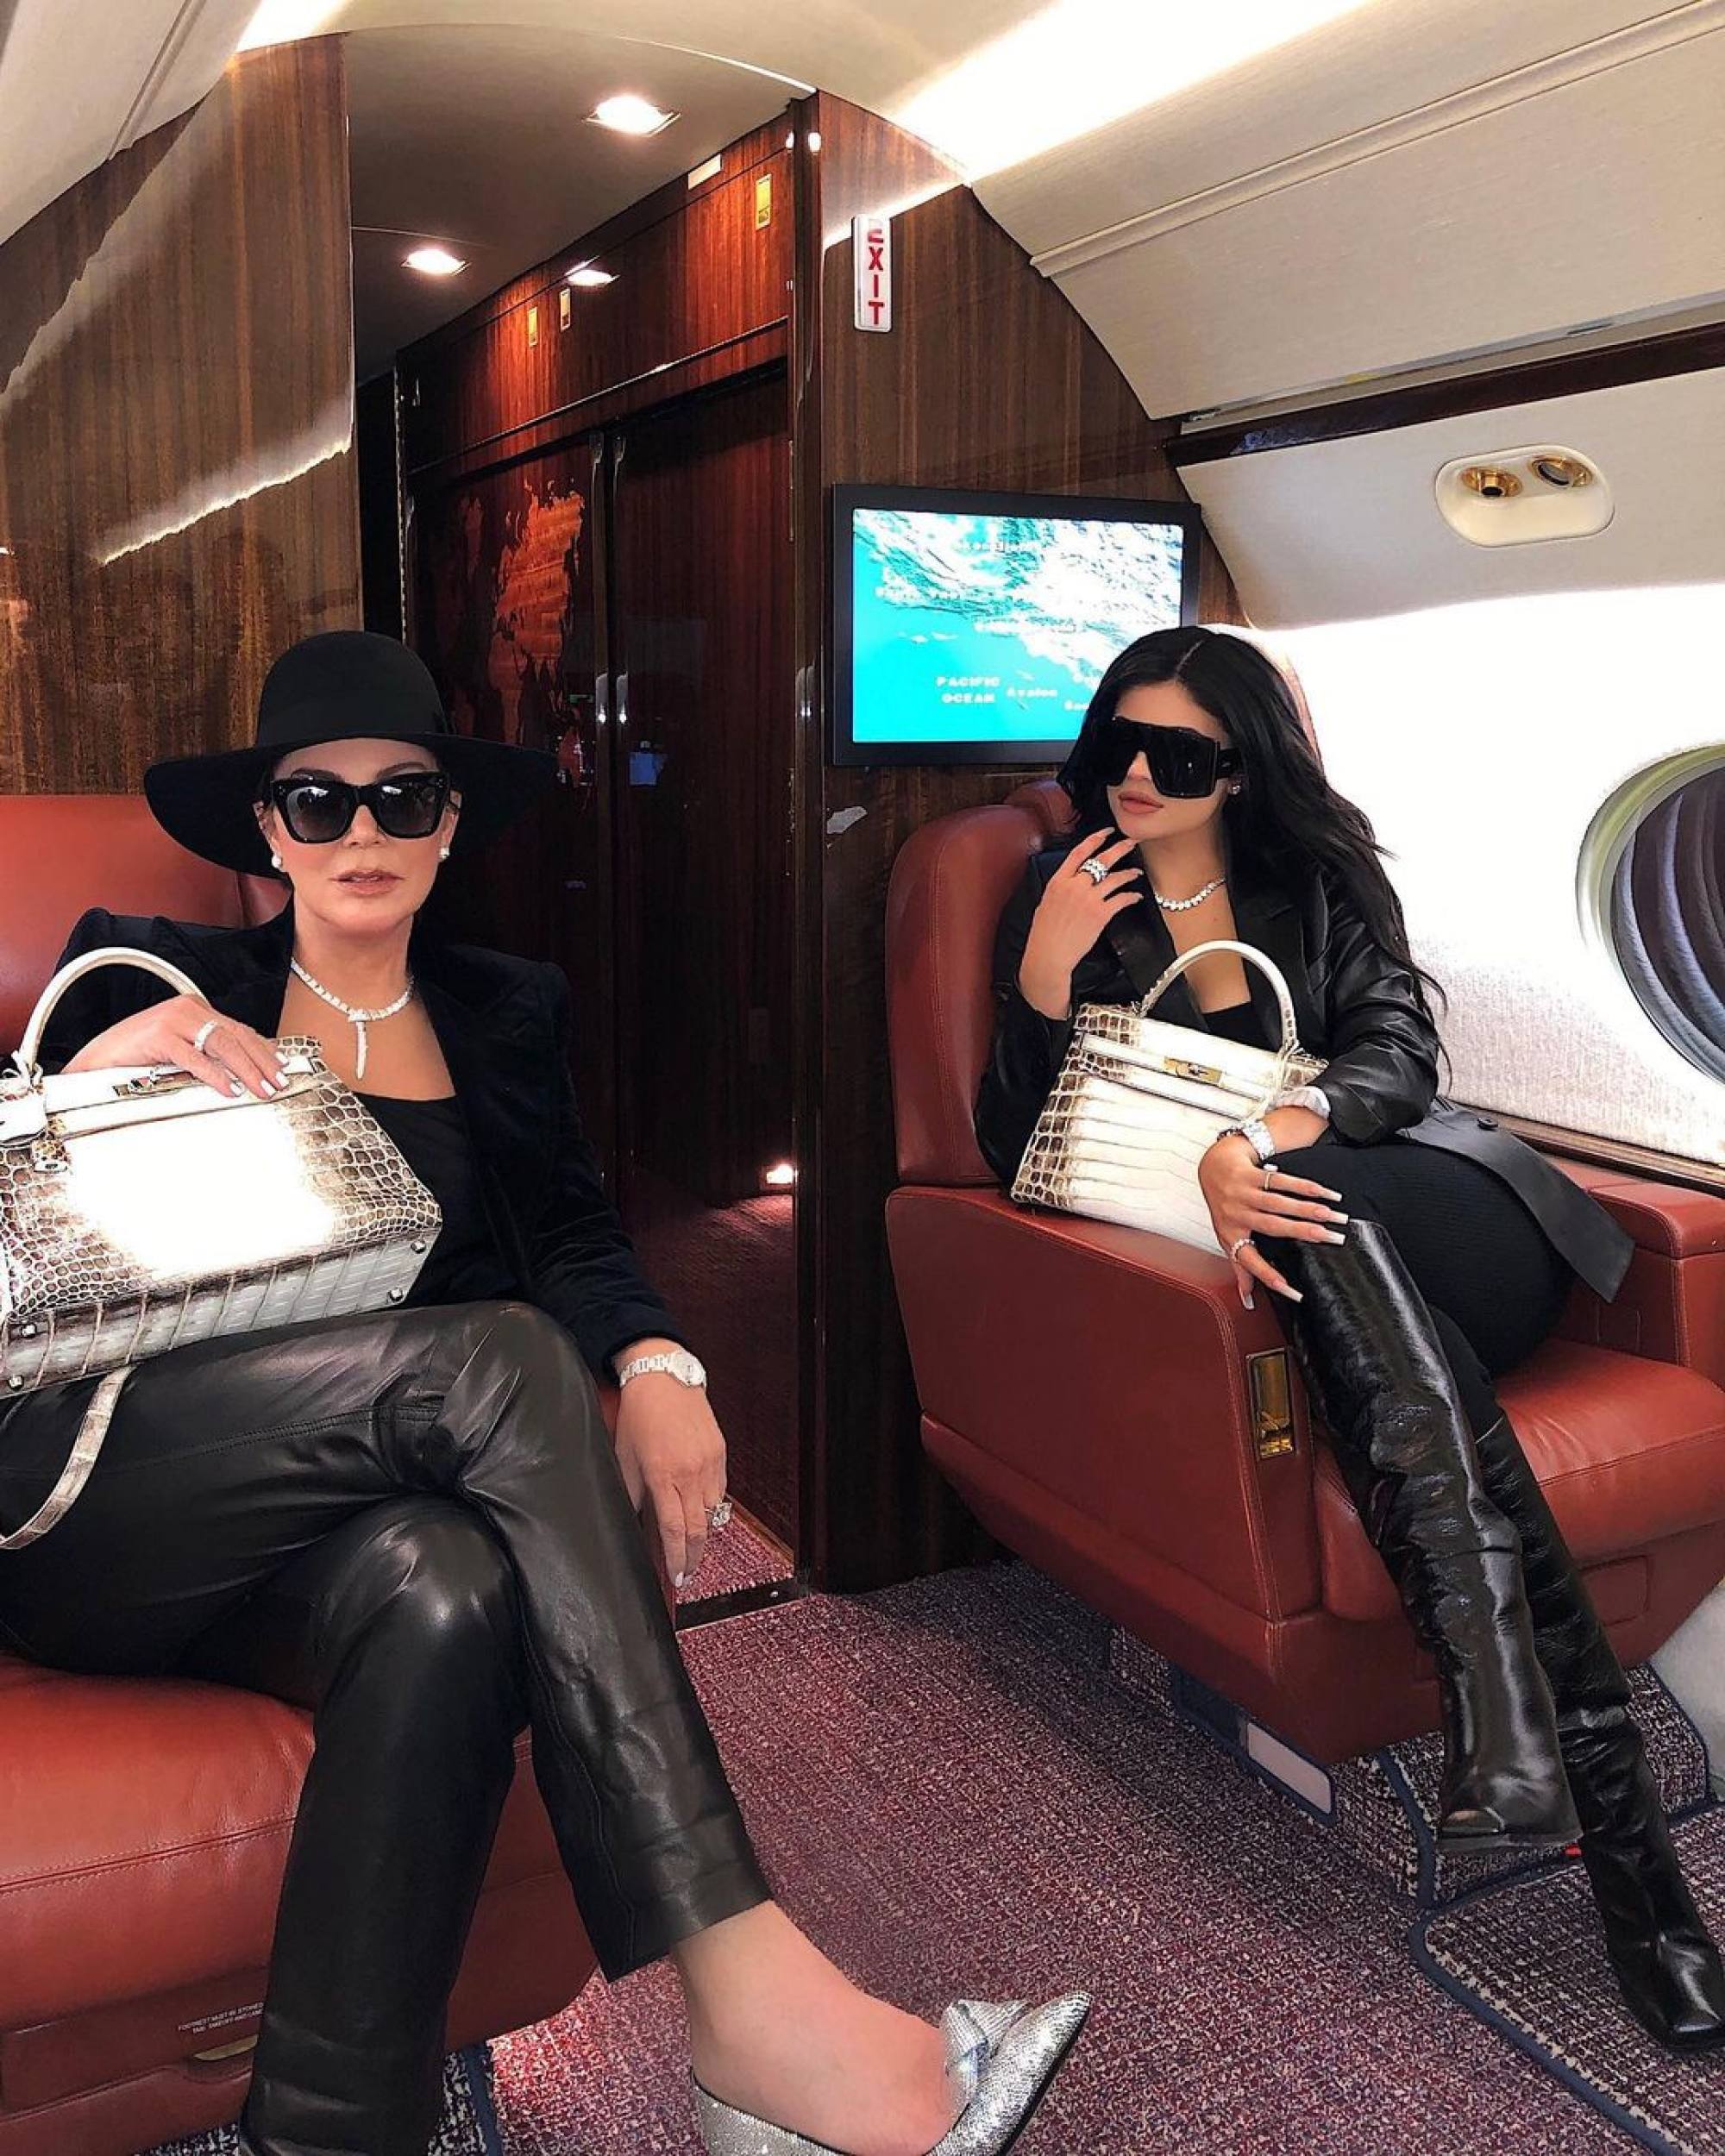 Most expensive Hermès Birkin bags of all time